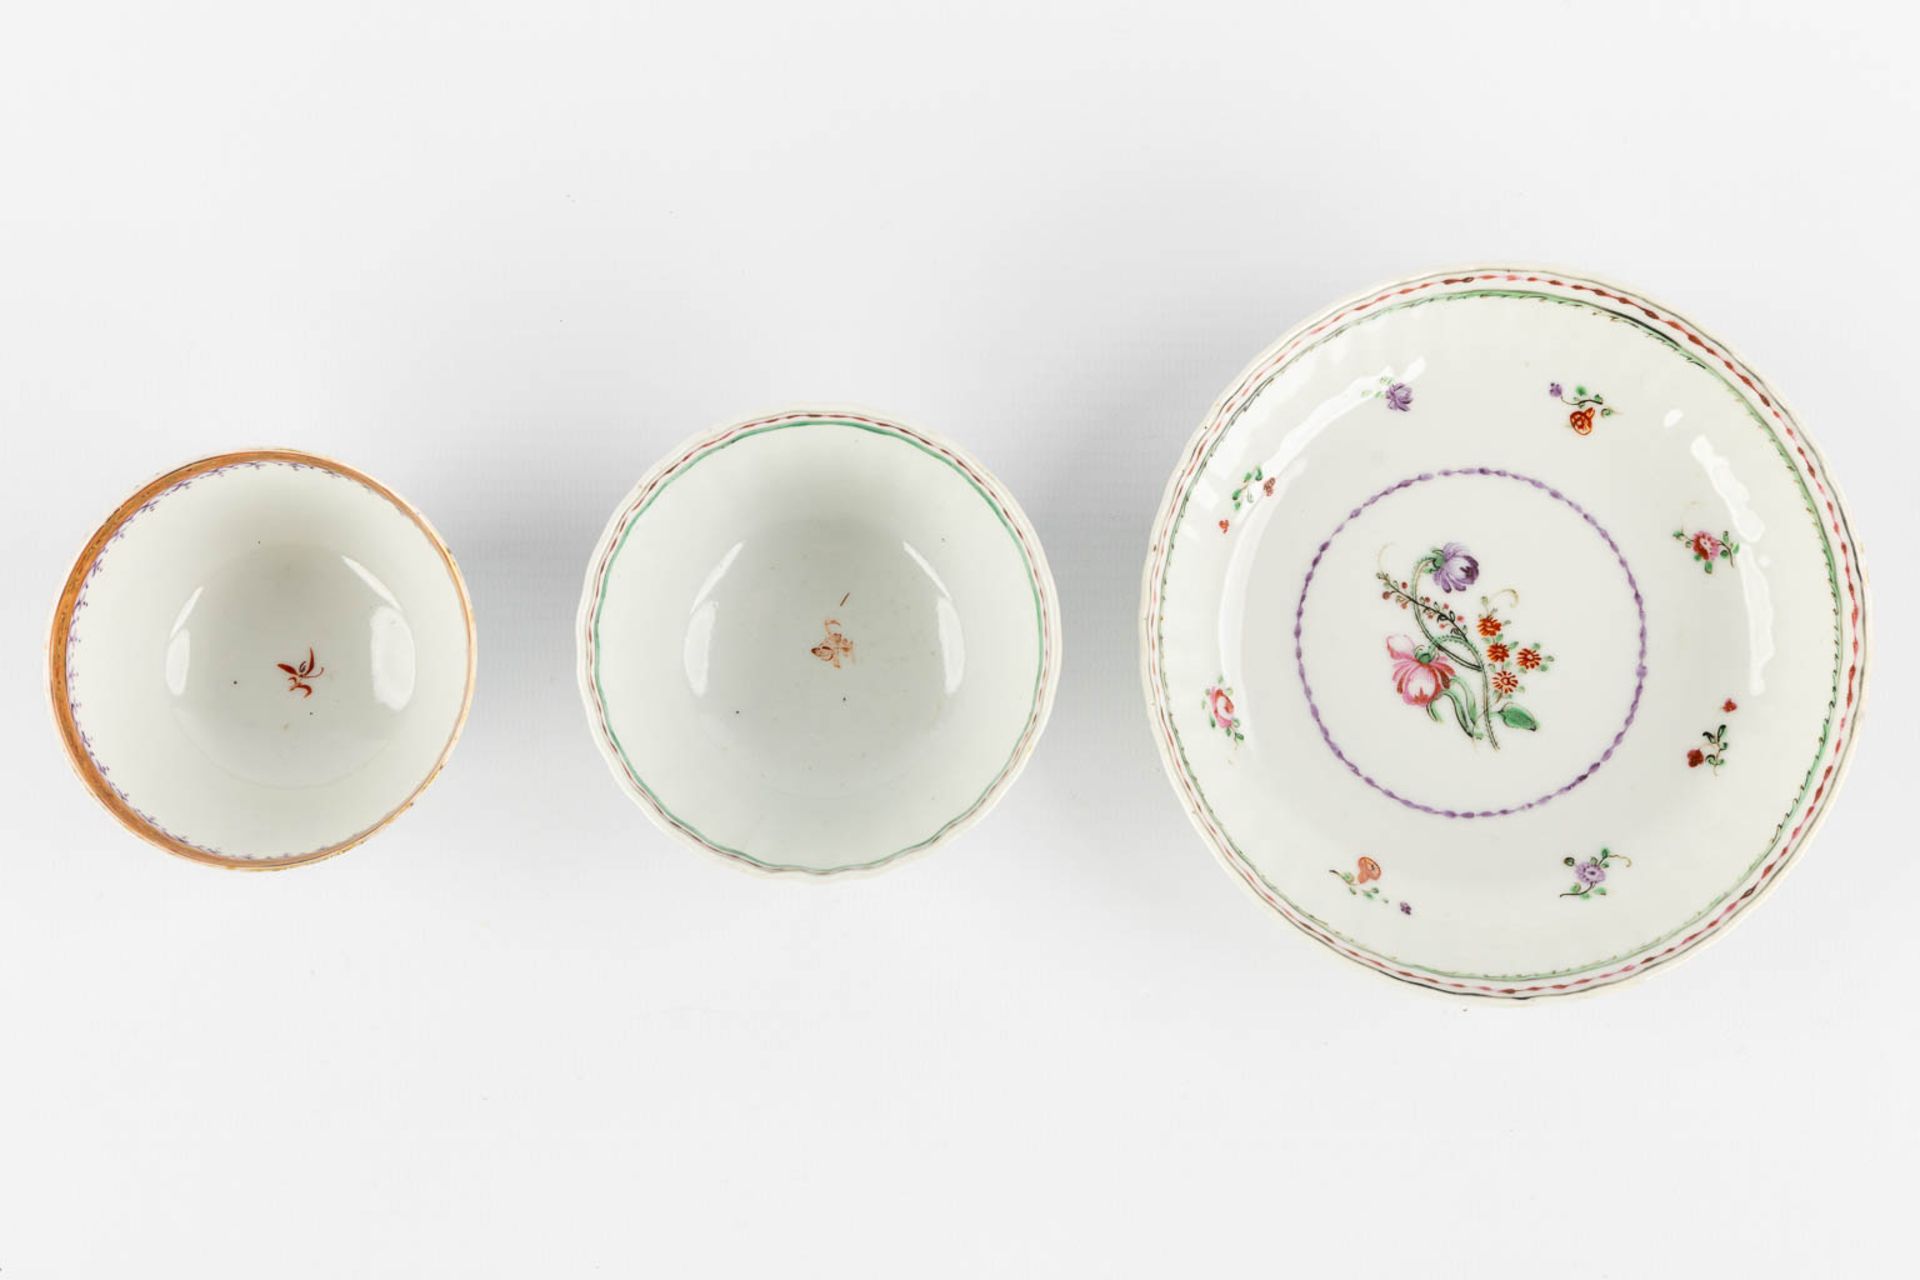 Ten Chinese Famille Rose plates and cups, flower decor. (D:23,5 cm) - Image 12 of 13